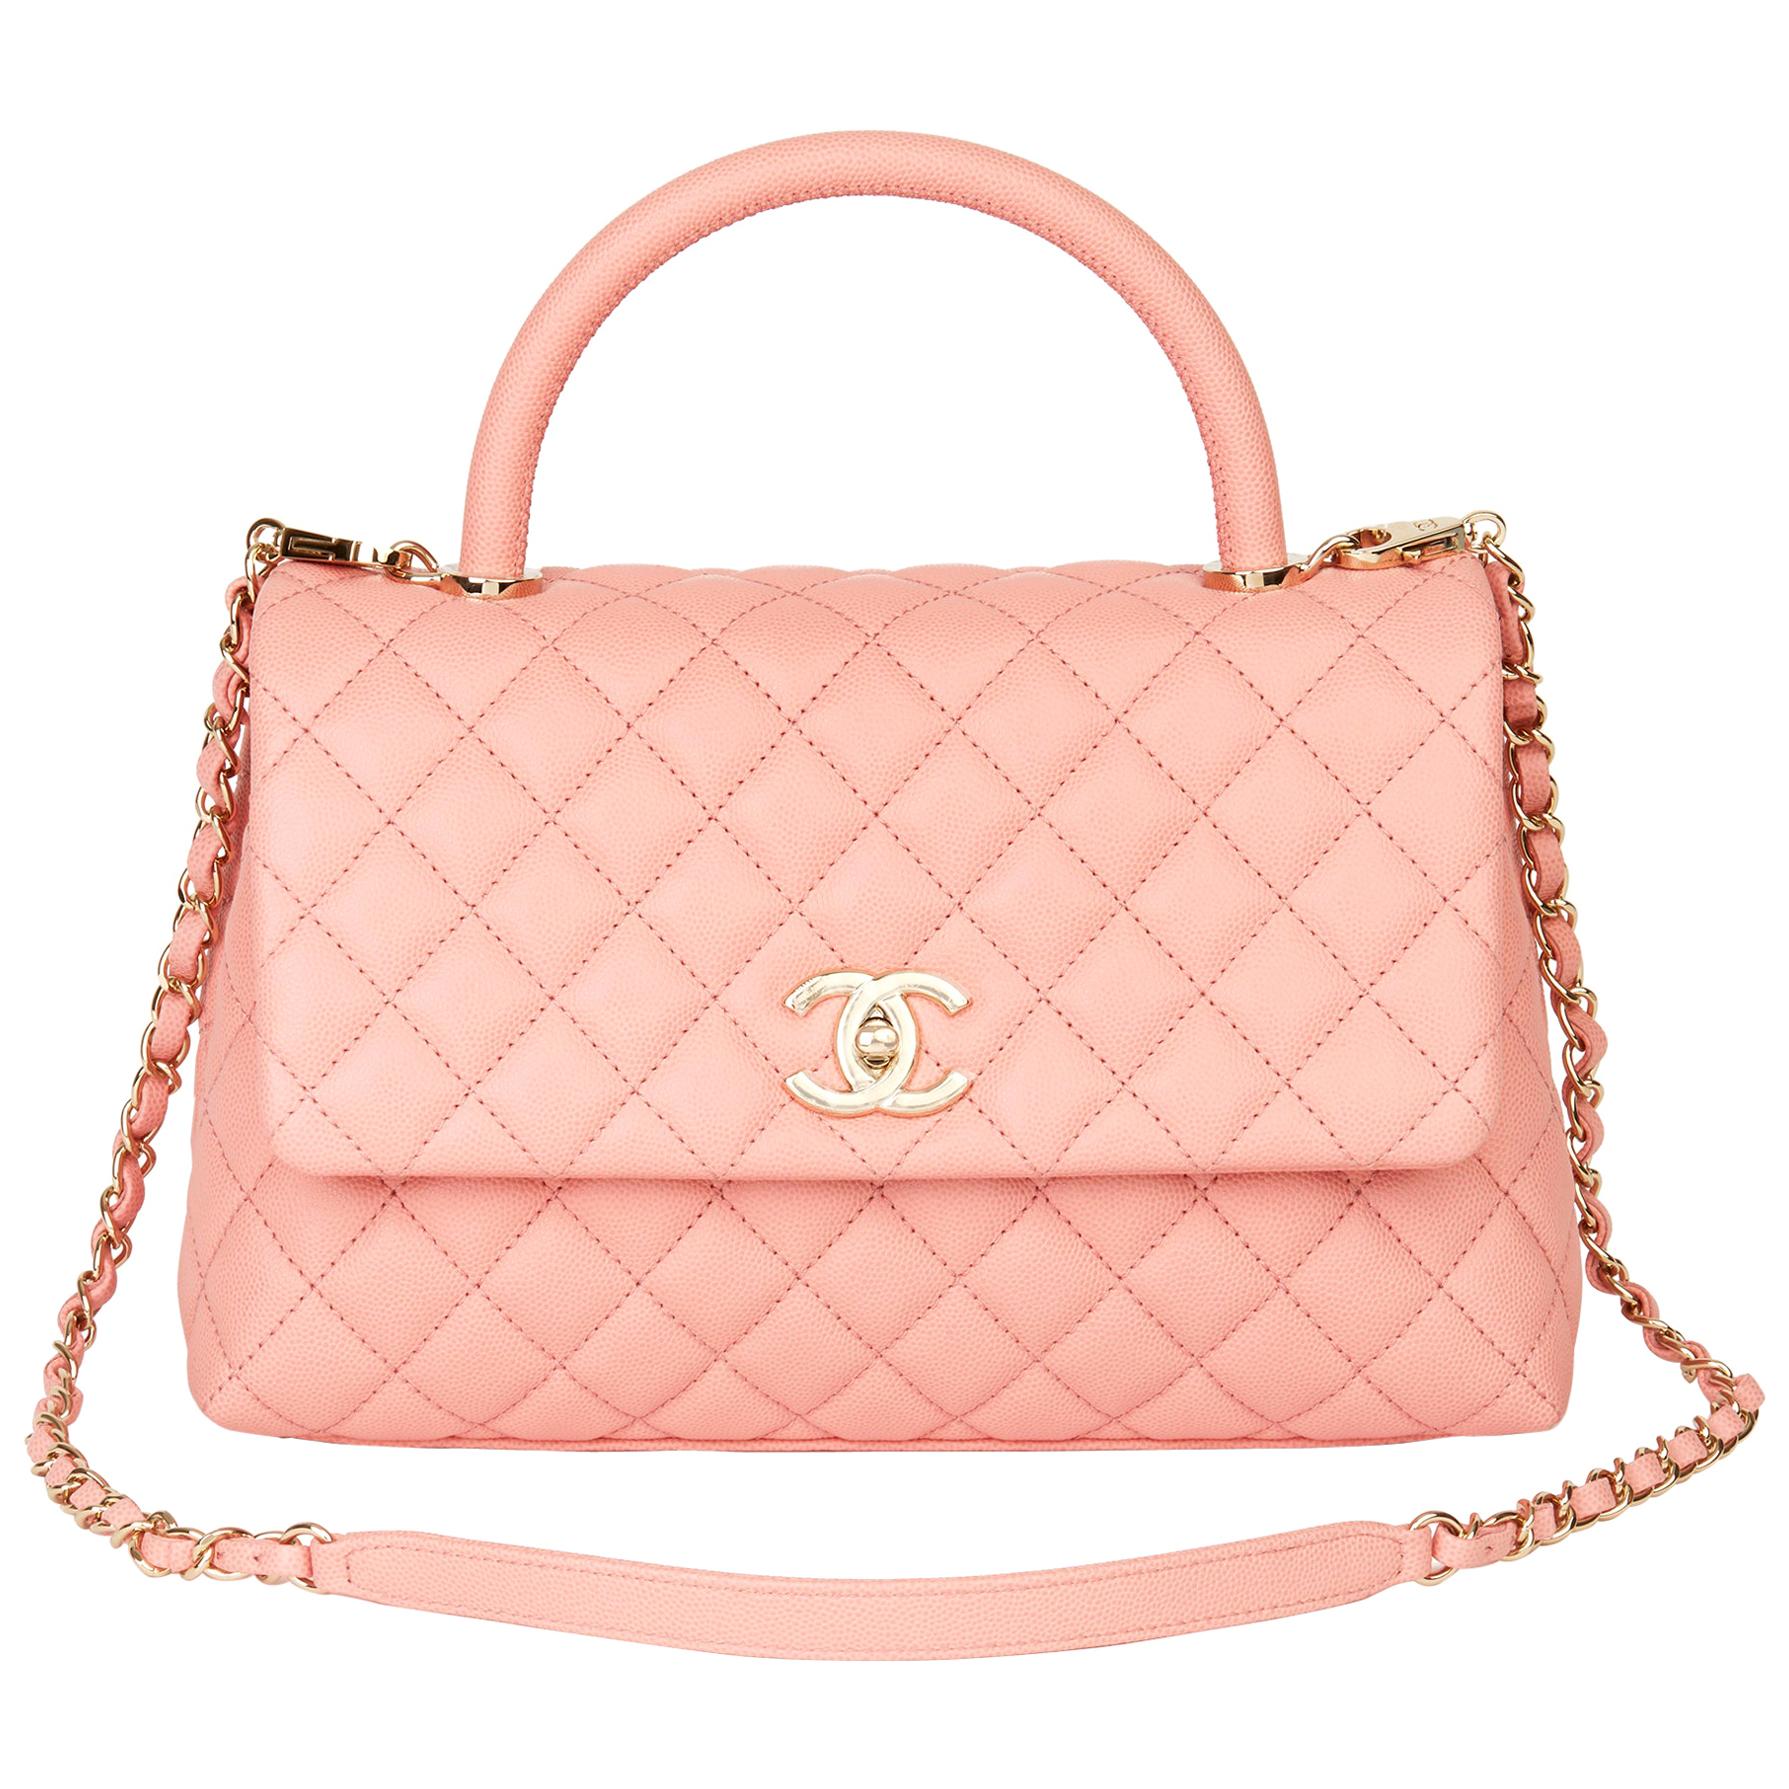 2019 Chanel Pink Quilted Caviar Leather Small Coco Handle